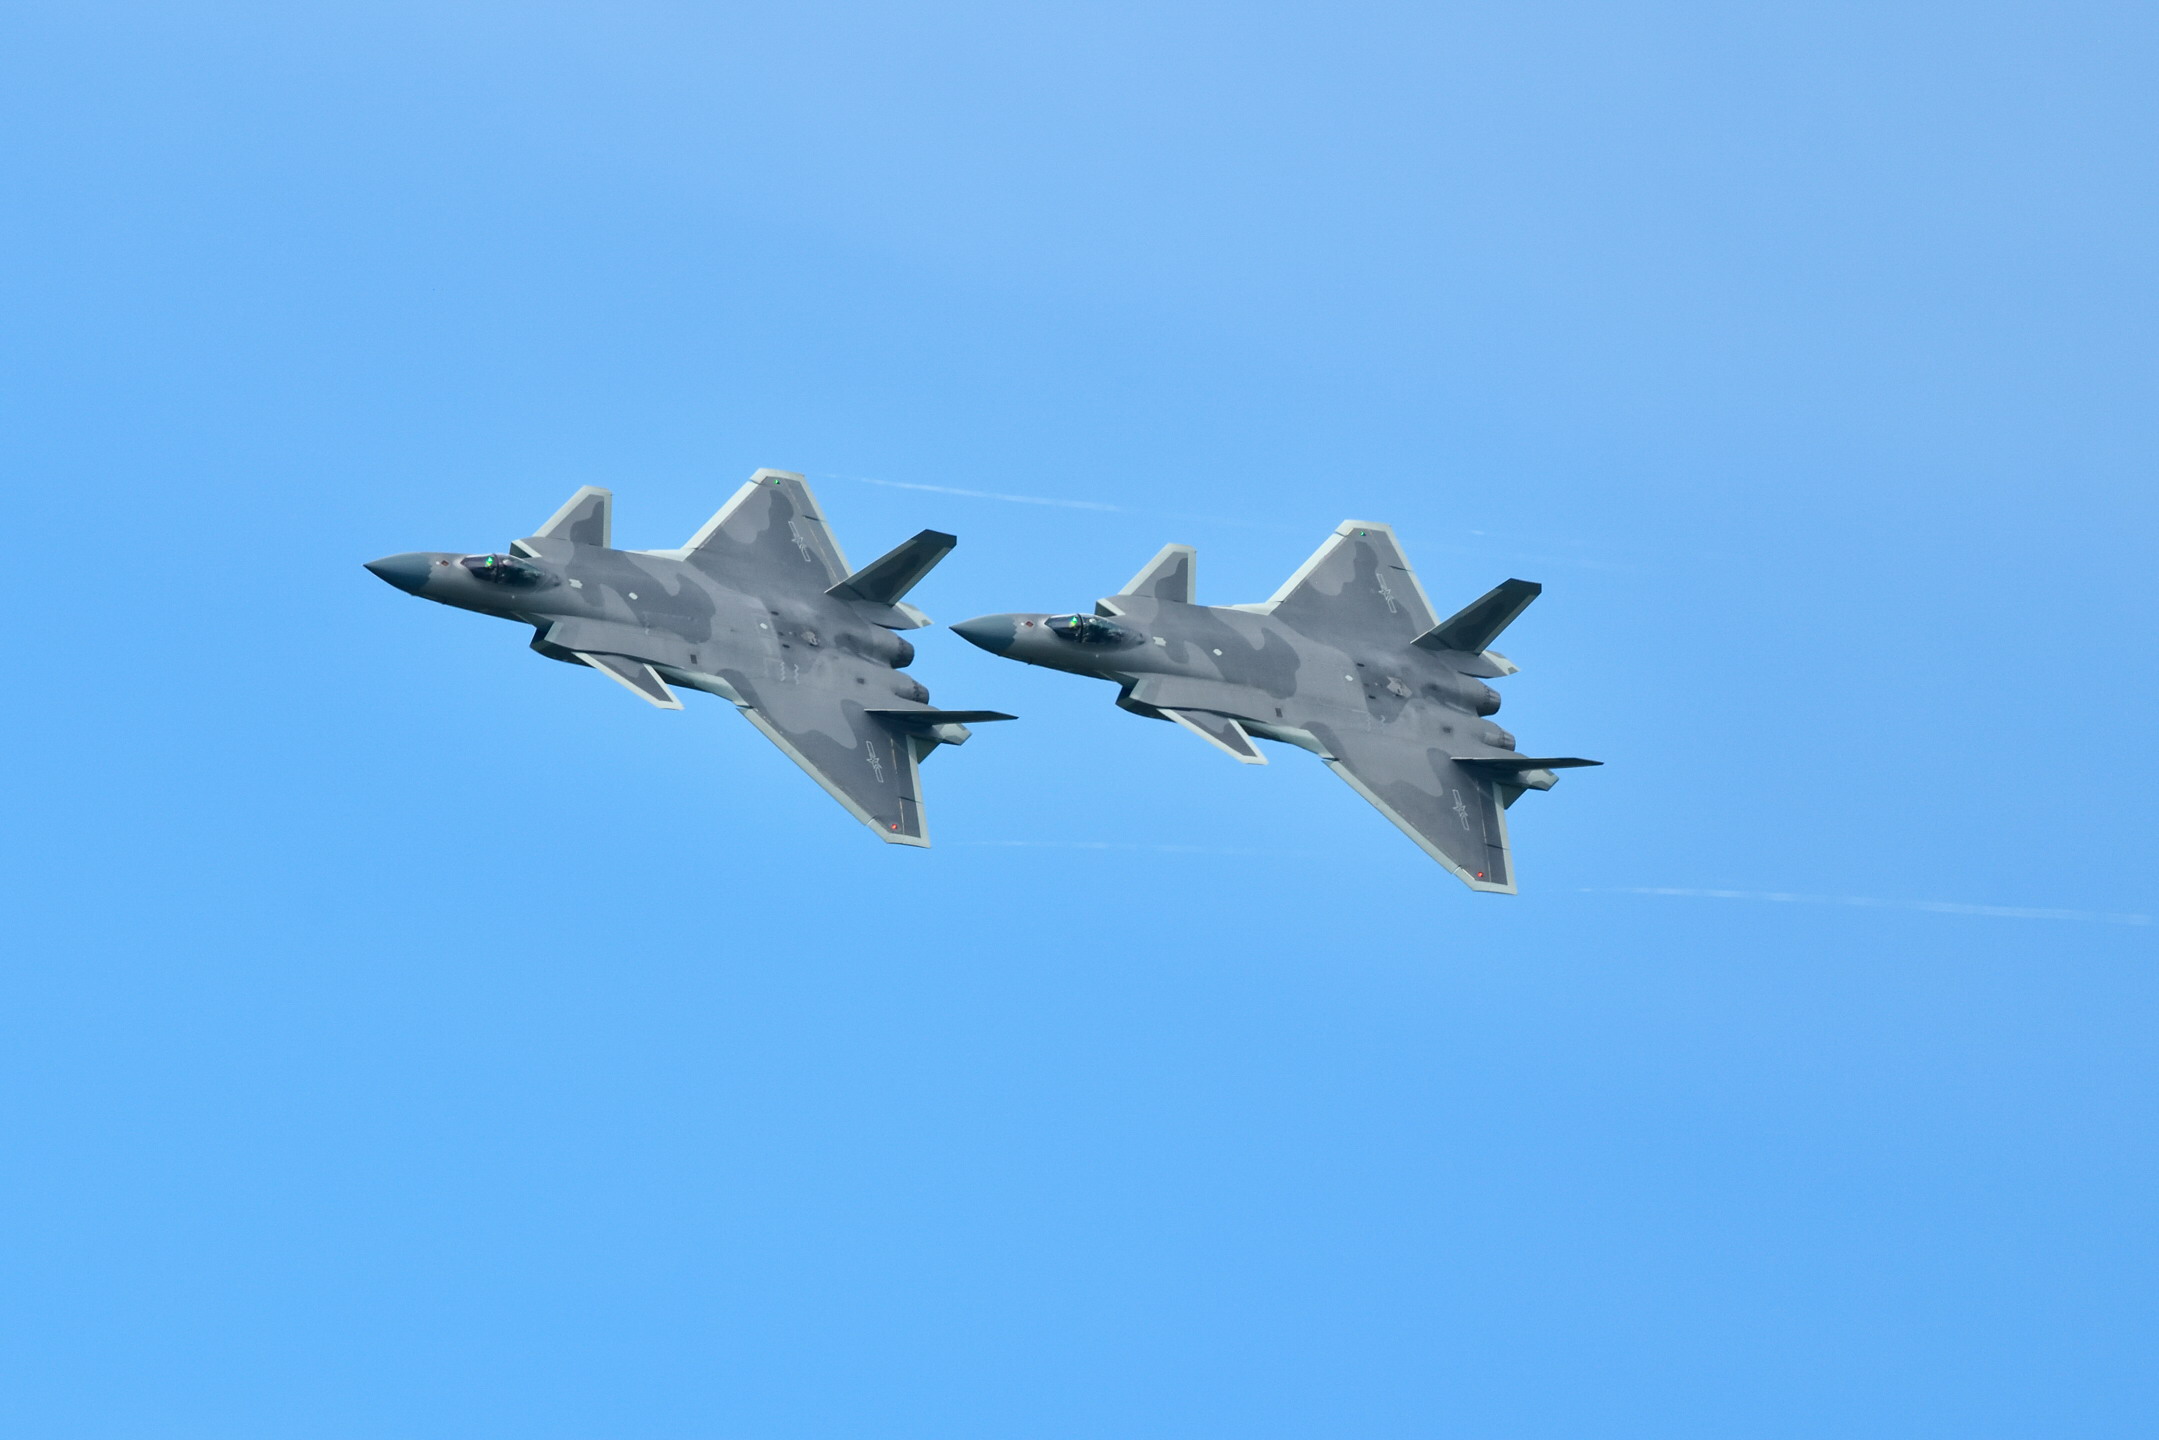 General 2159x1440 Chengdu J-20 PLAAF simple background minimalism aircraft flying sky military military aircraft